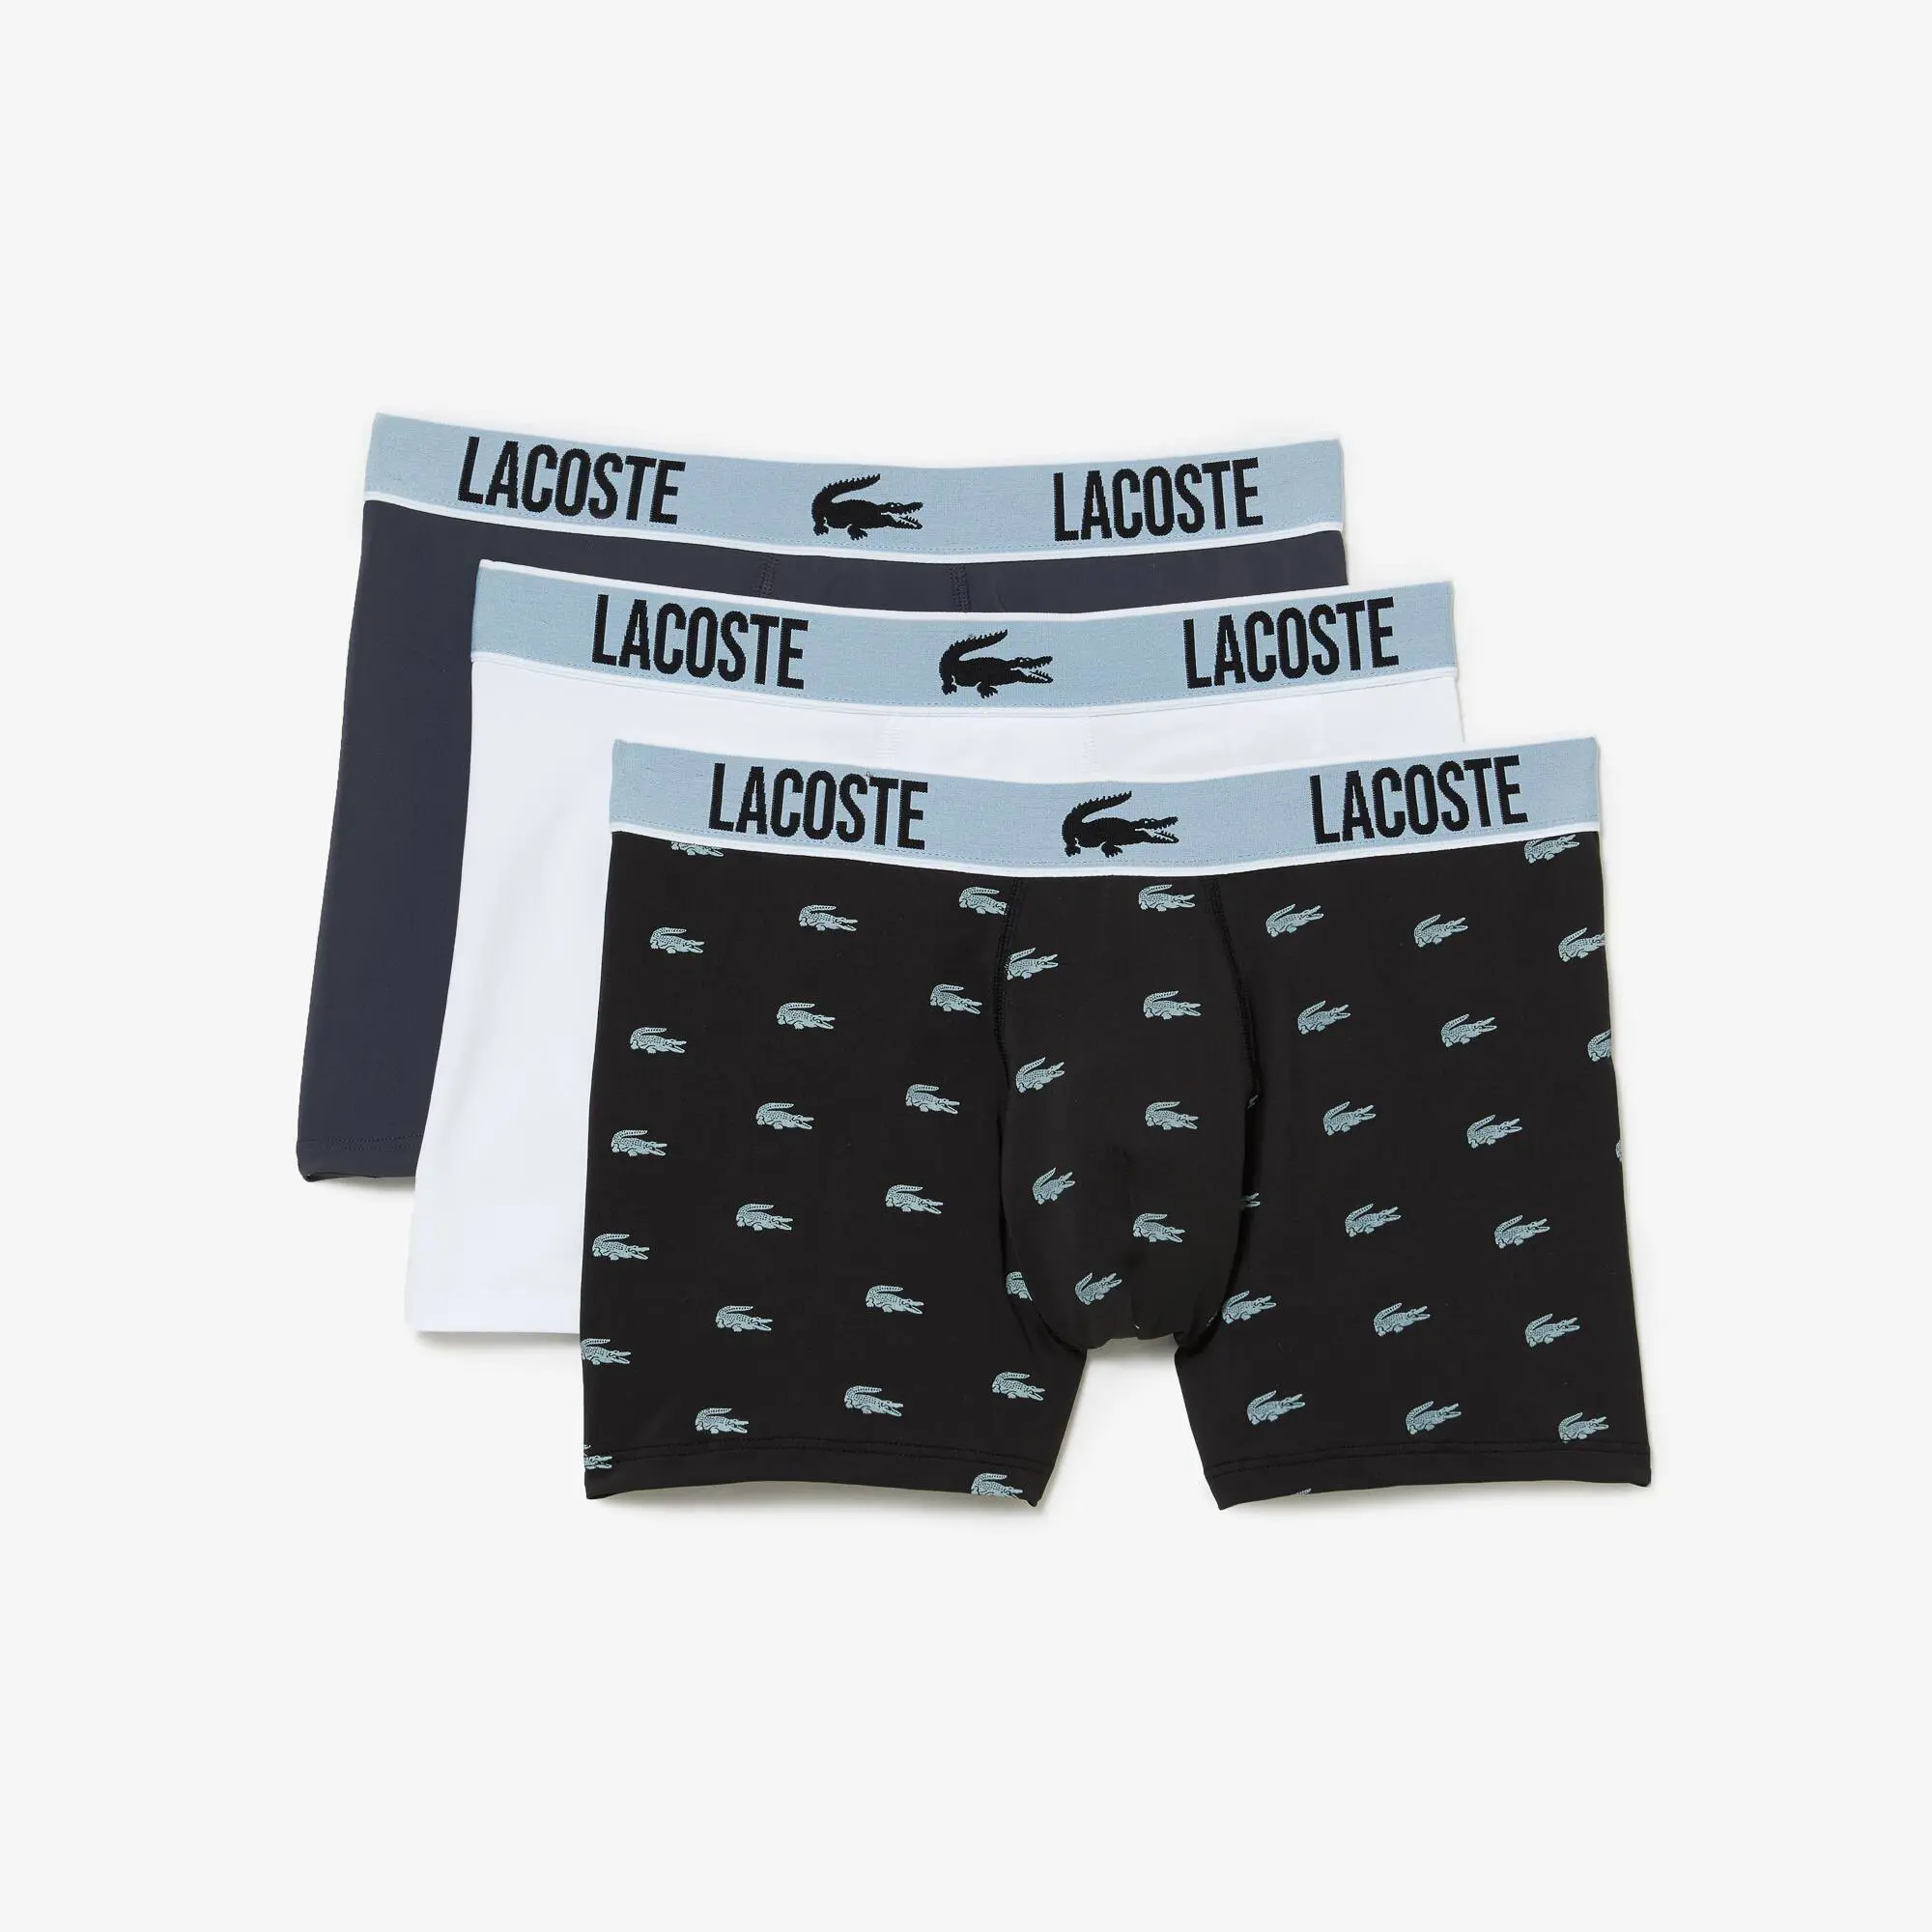 Lacoste Men's Lacoste Recycled Polyester Jersey Trunk Three-Pack. 2